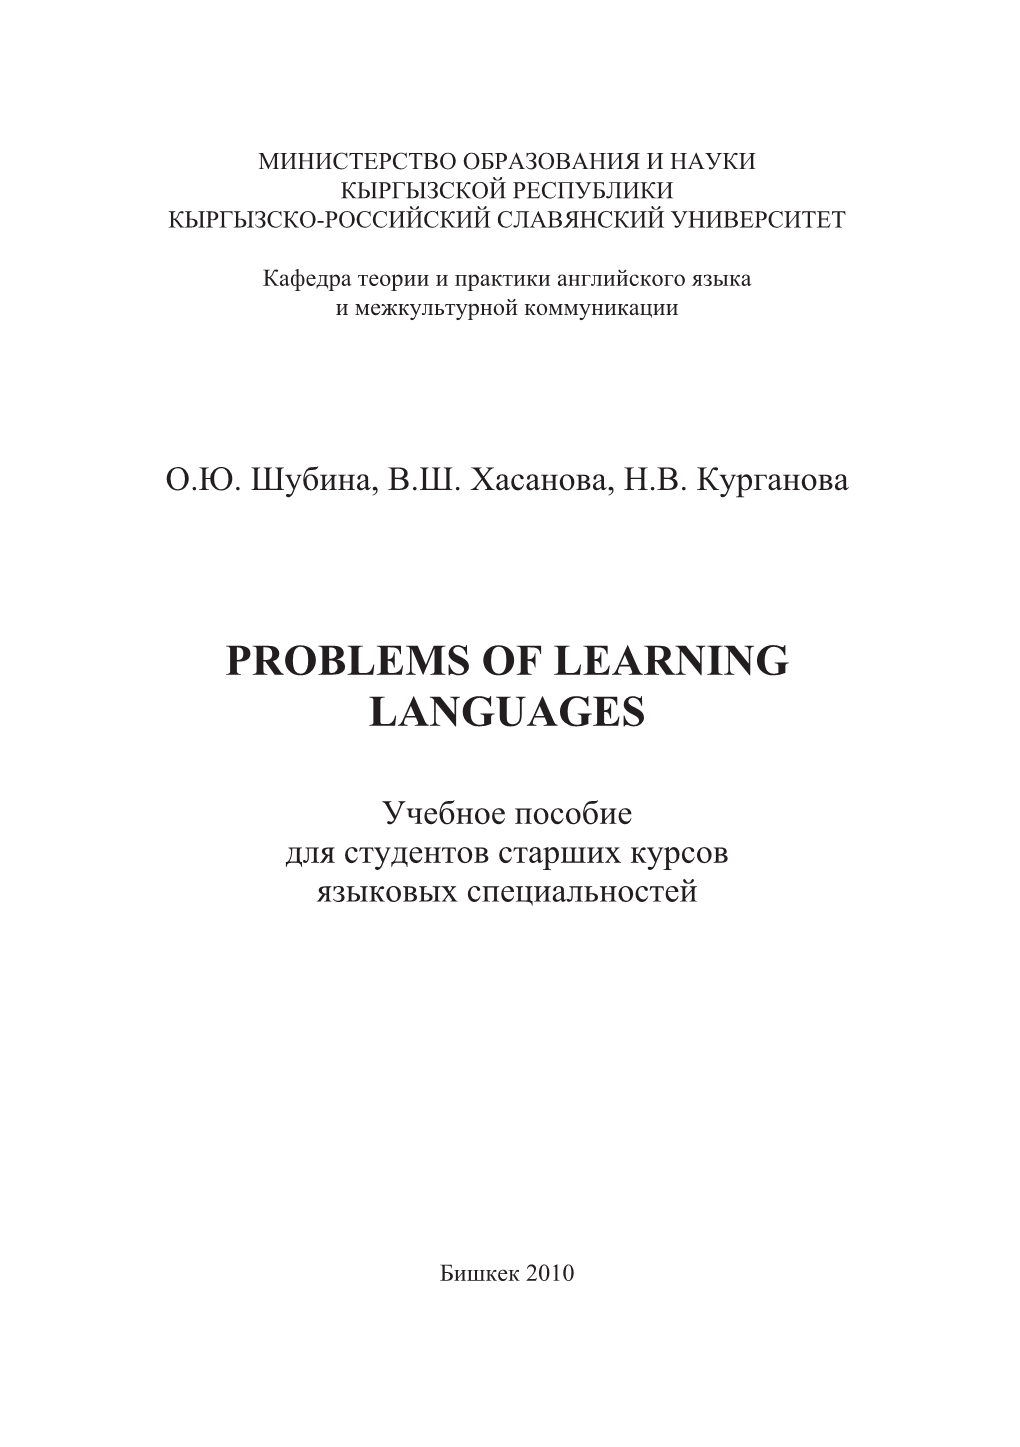 Problems of Learning Languages